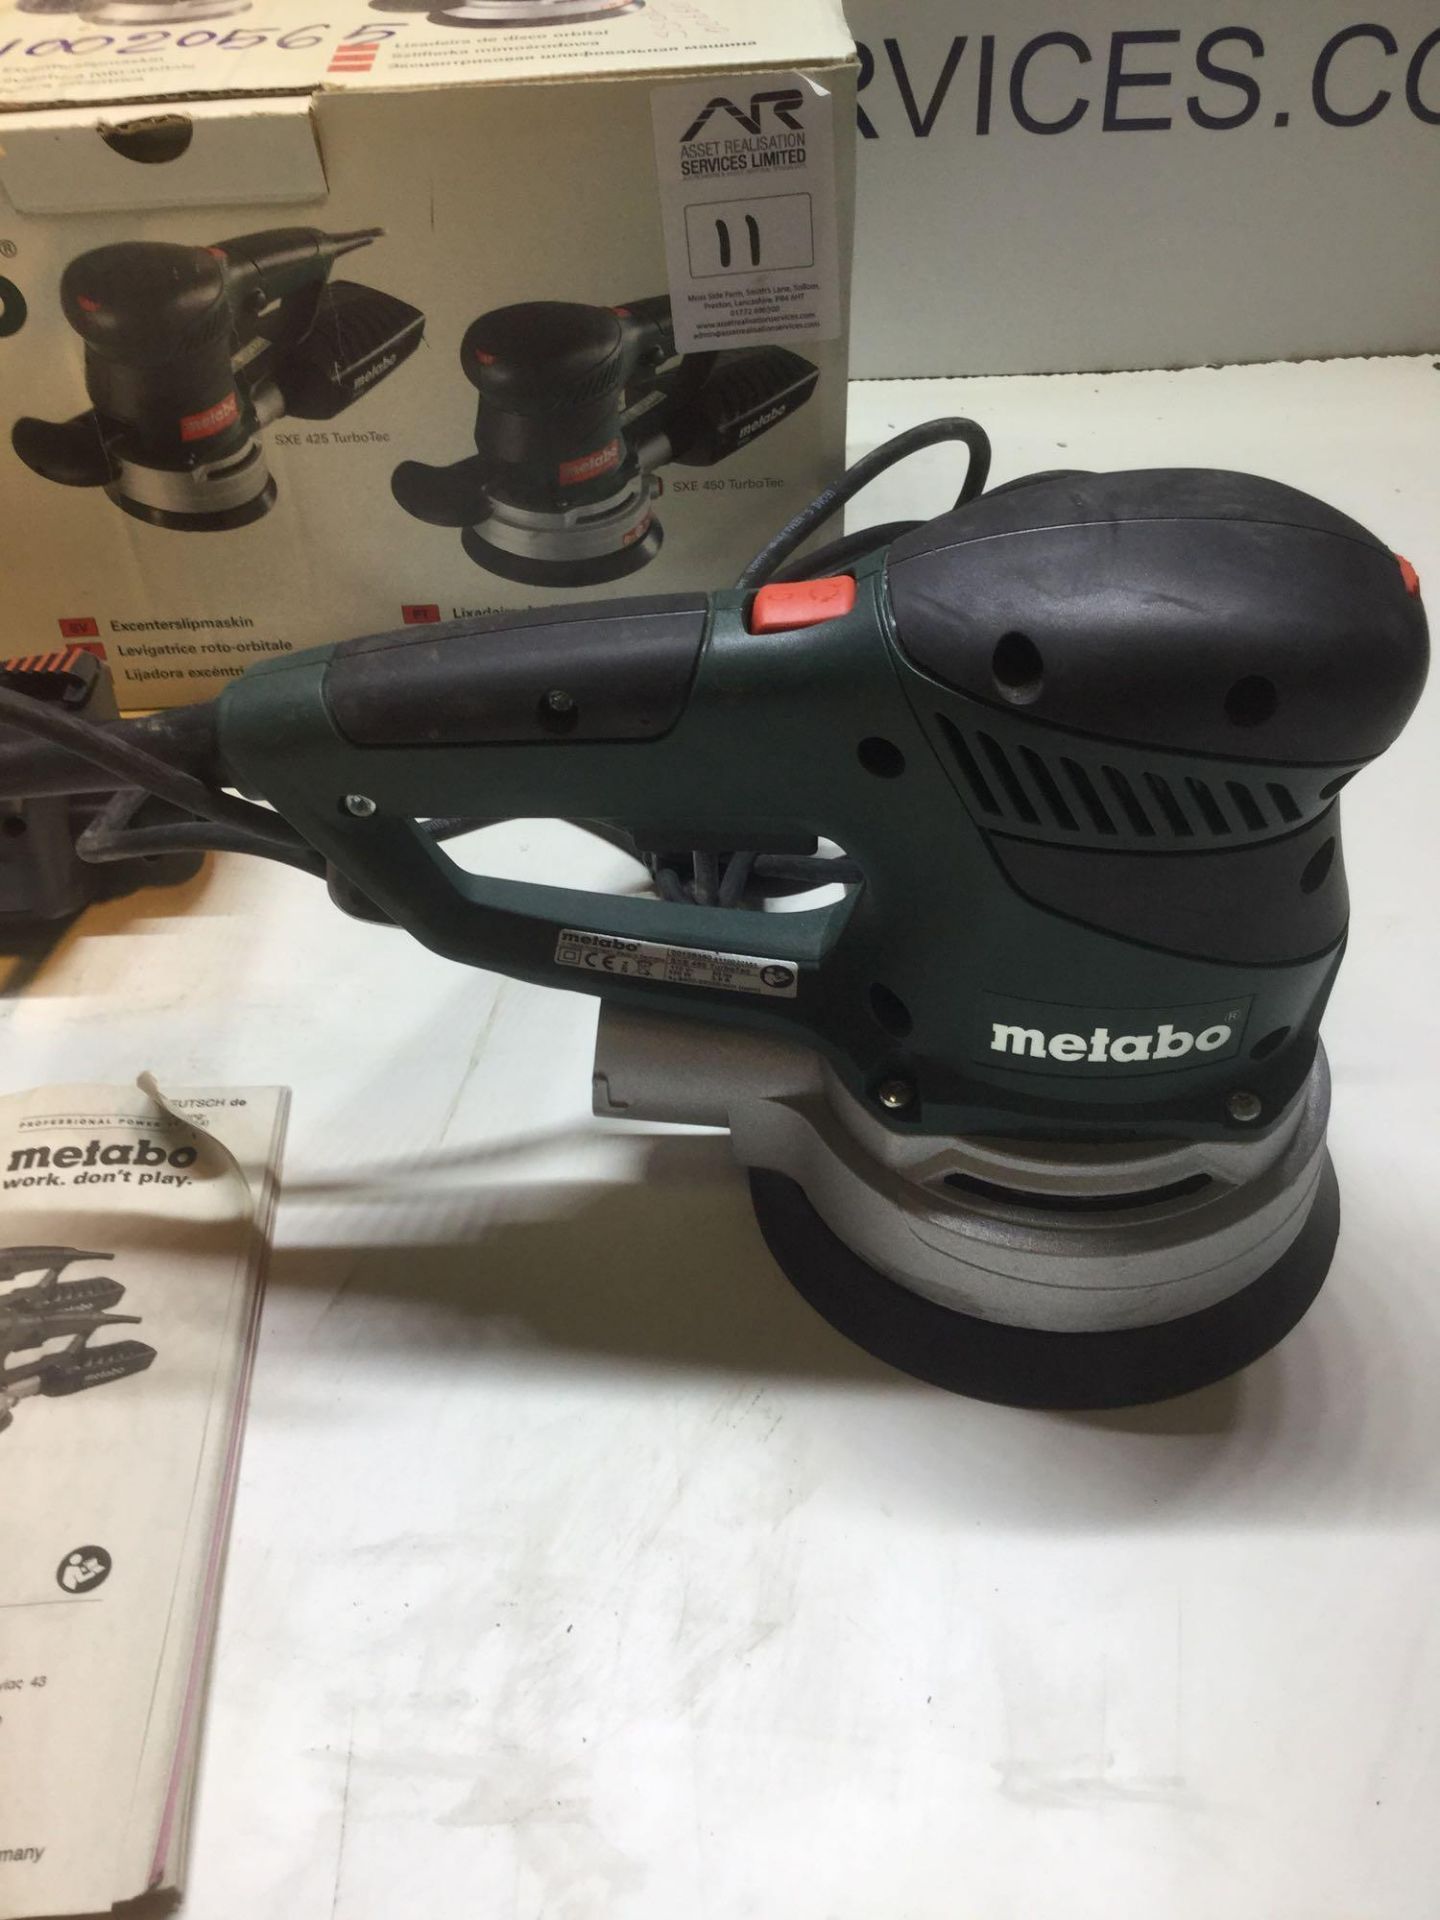 Metabo SXE 450 Orbital Sander c/w Filter & Attachments, 110v Boxed as New - Image 3 of 5